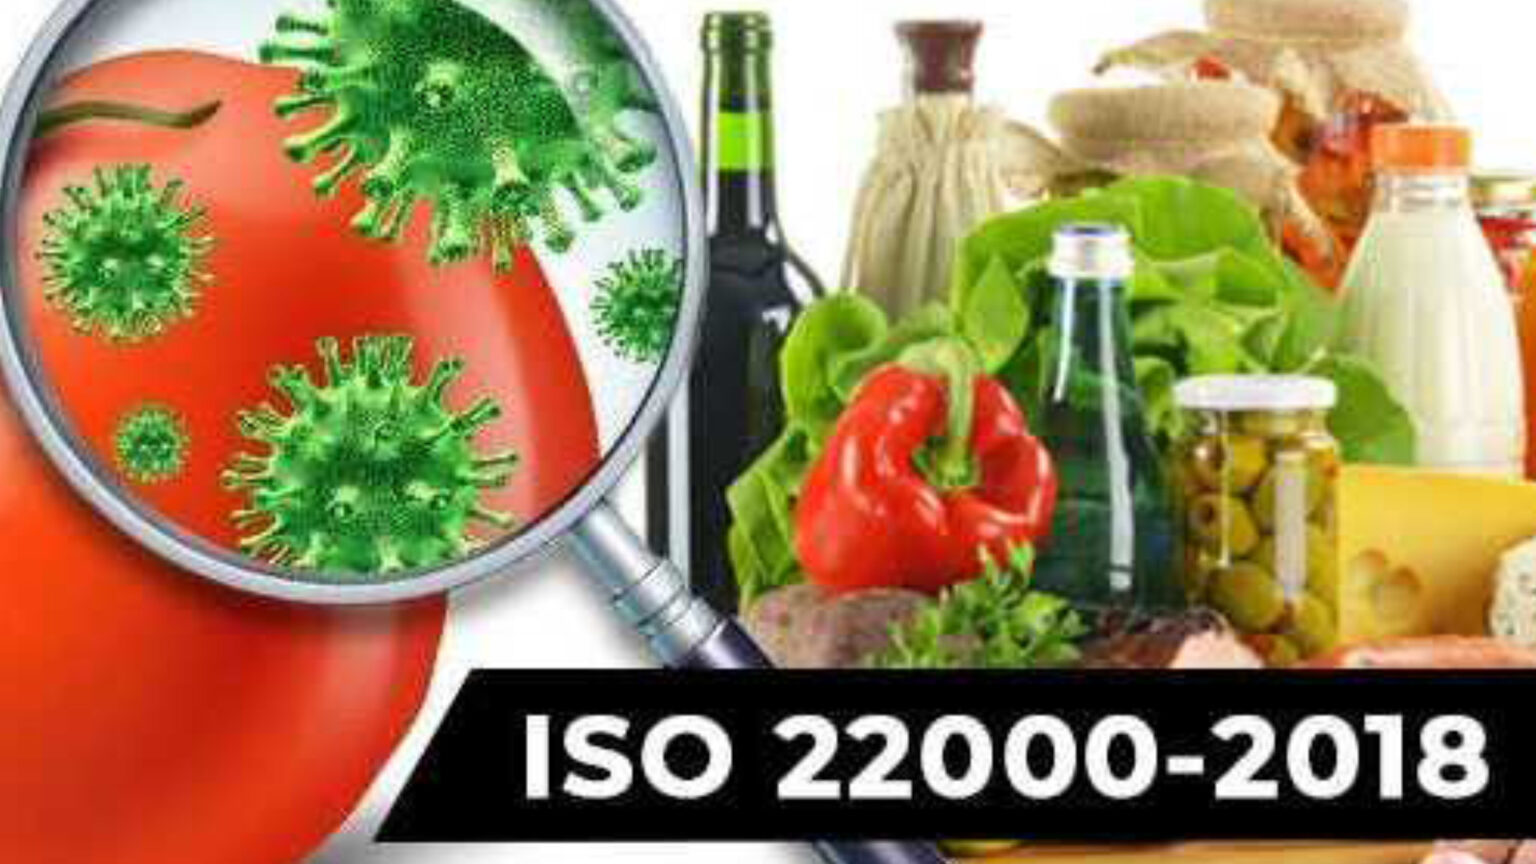 Which Business Should Apply For ISO 22000:2018 Certification In Kosovo? - IAL Global Consulting